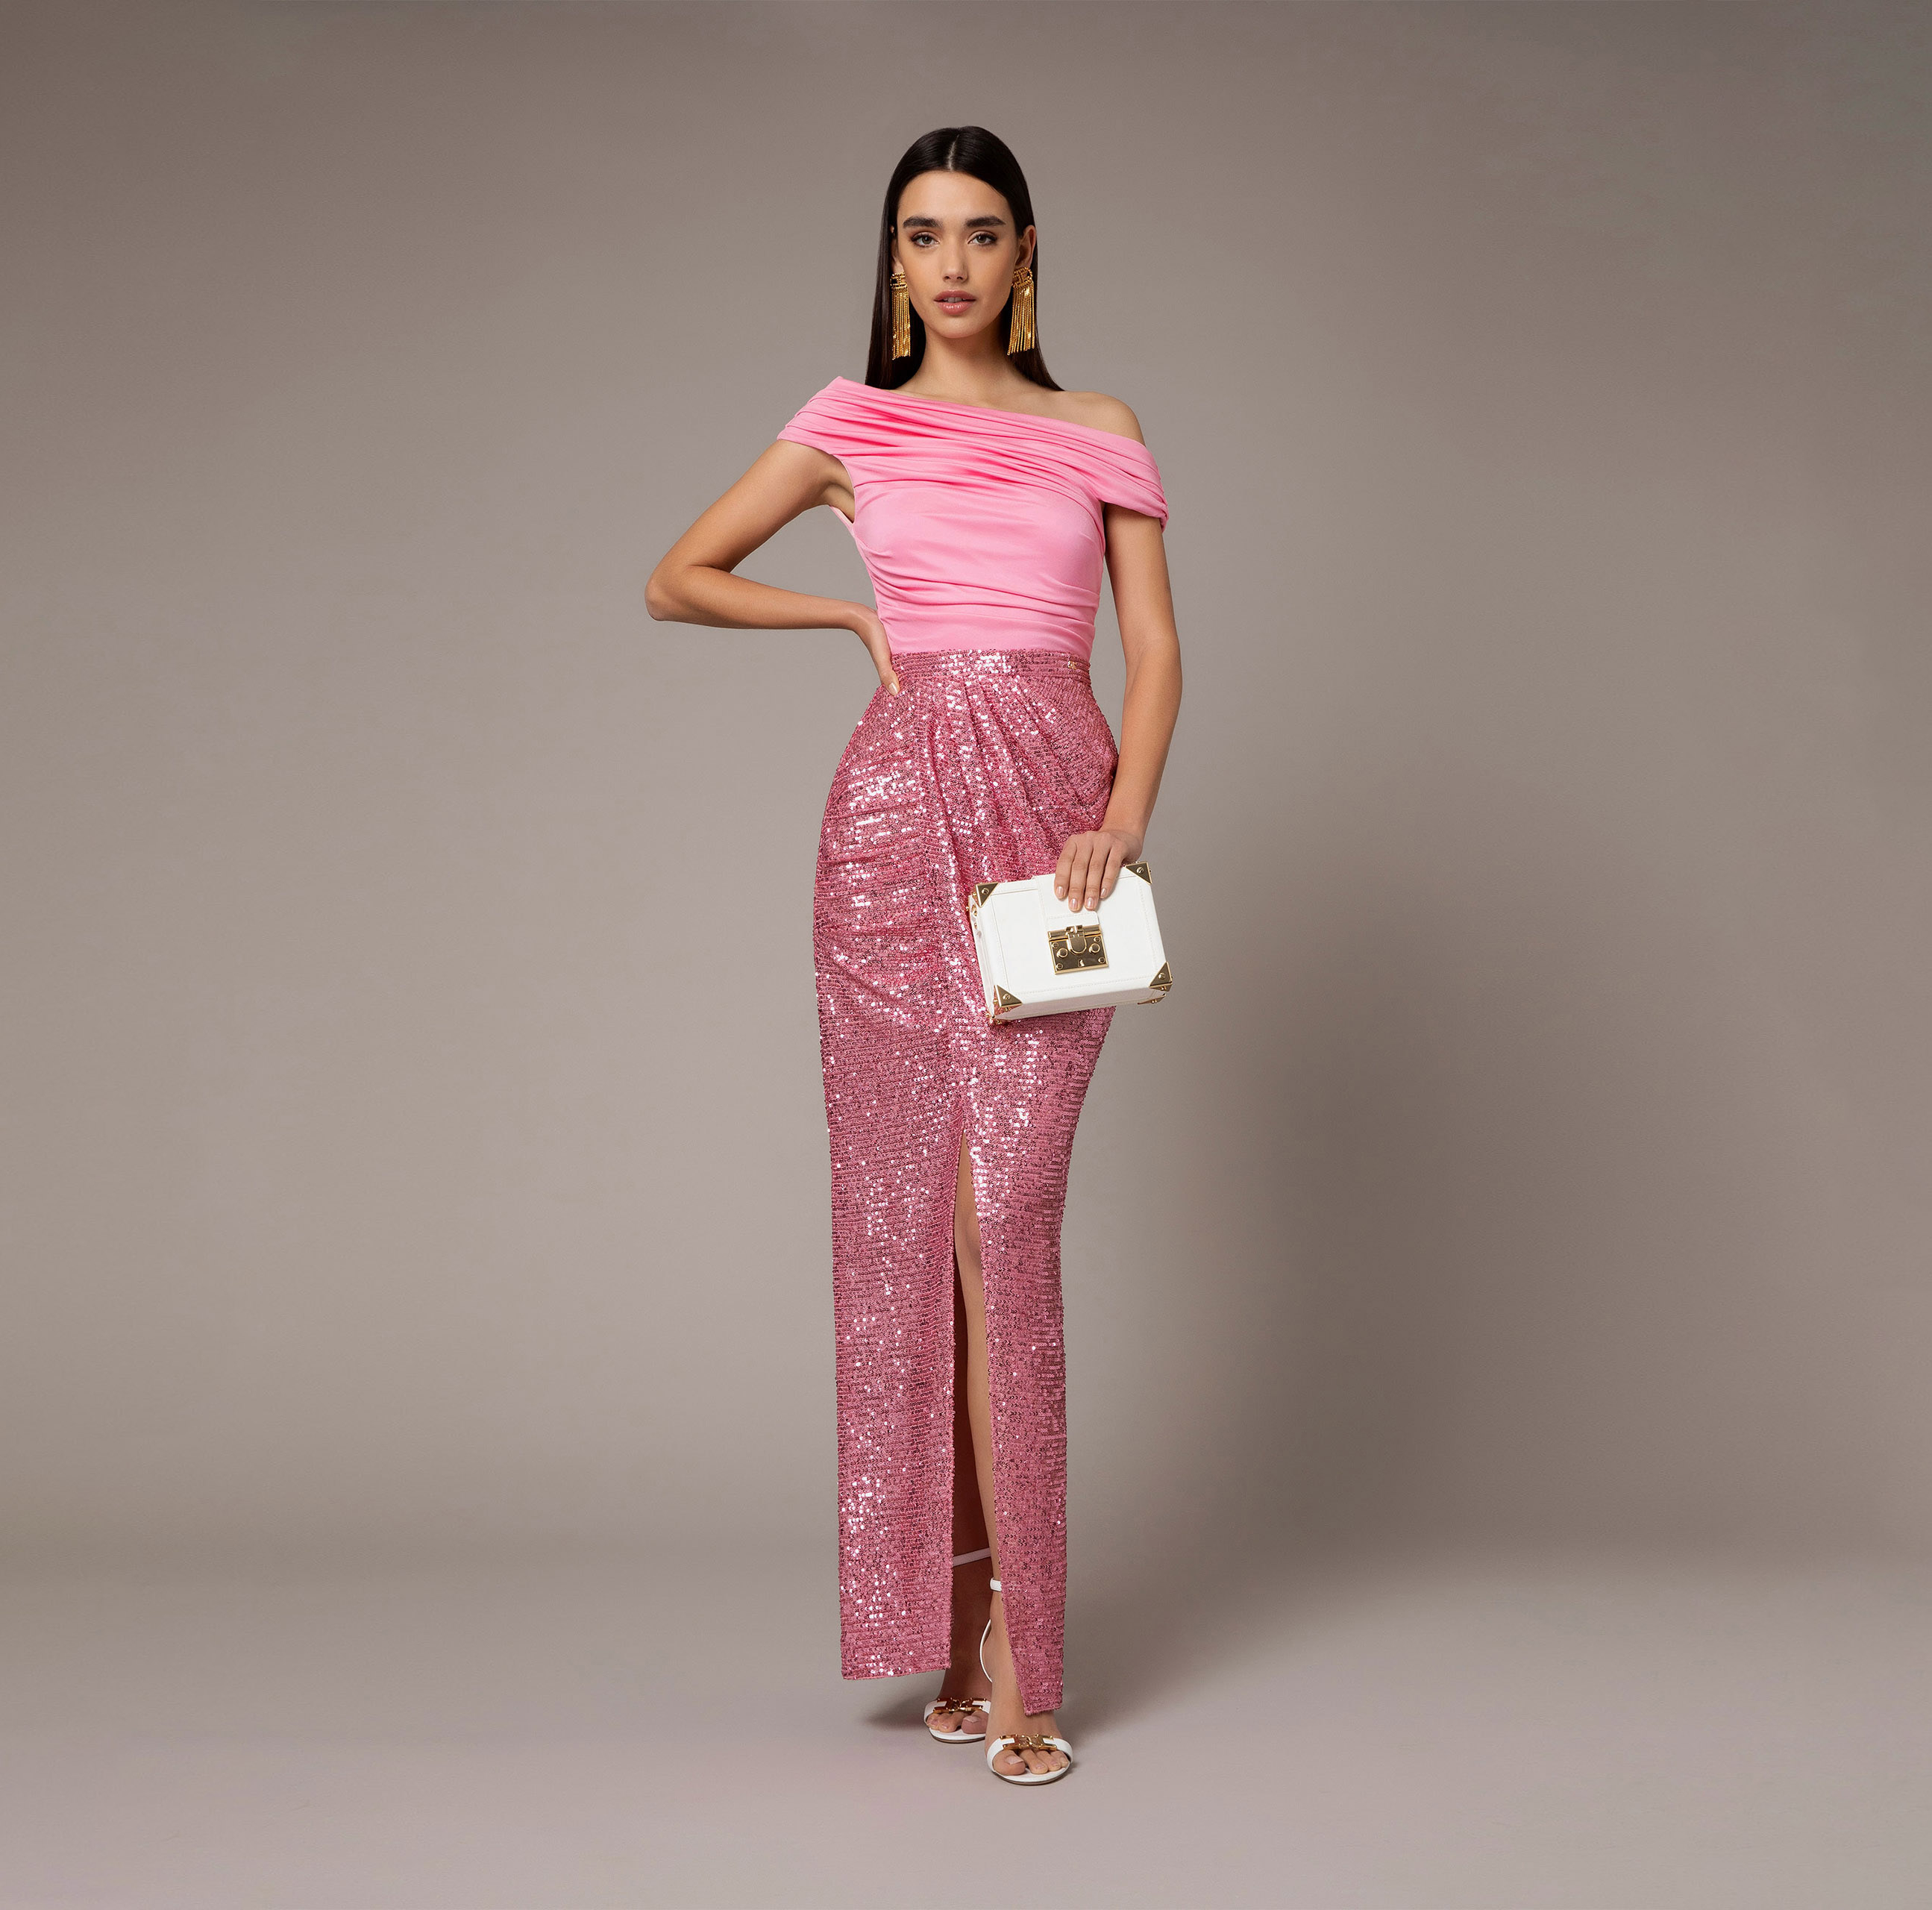 Red carpet dress with jersey top and sequin skirt - Elisabetta Franchi